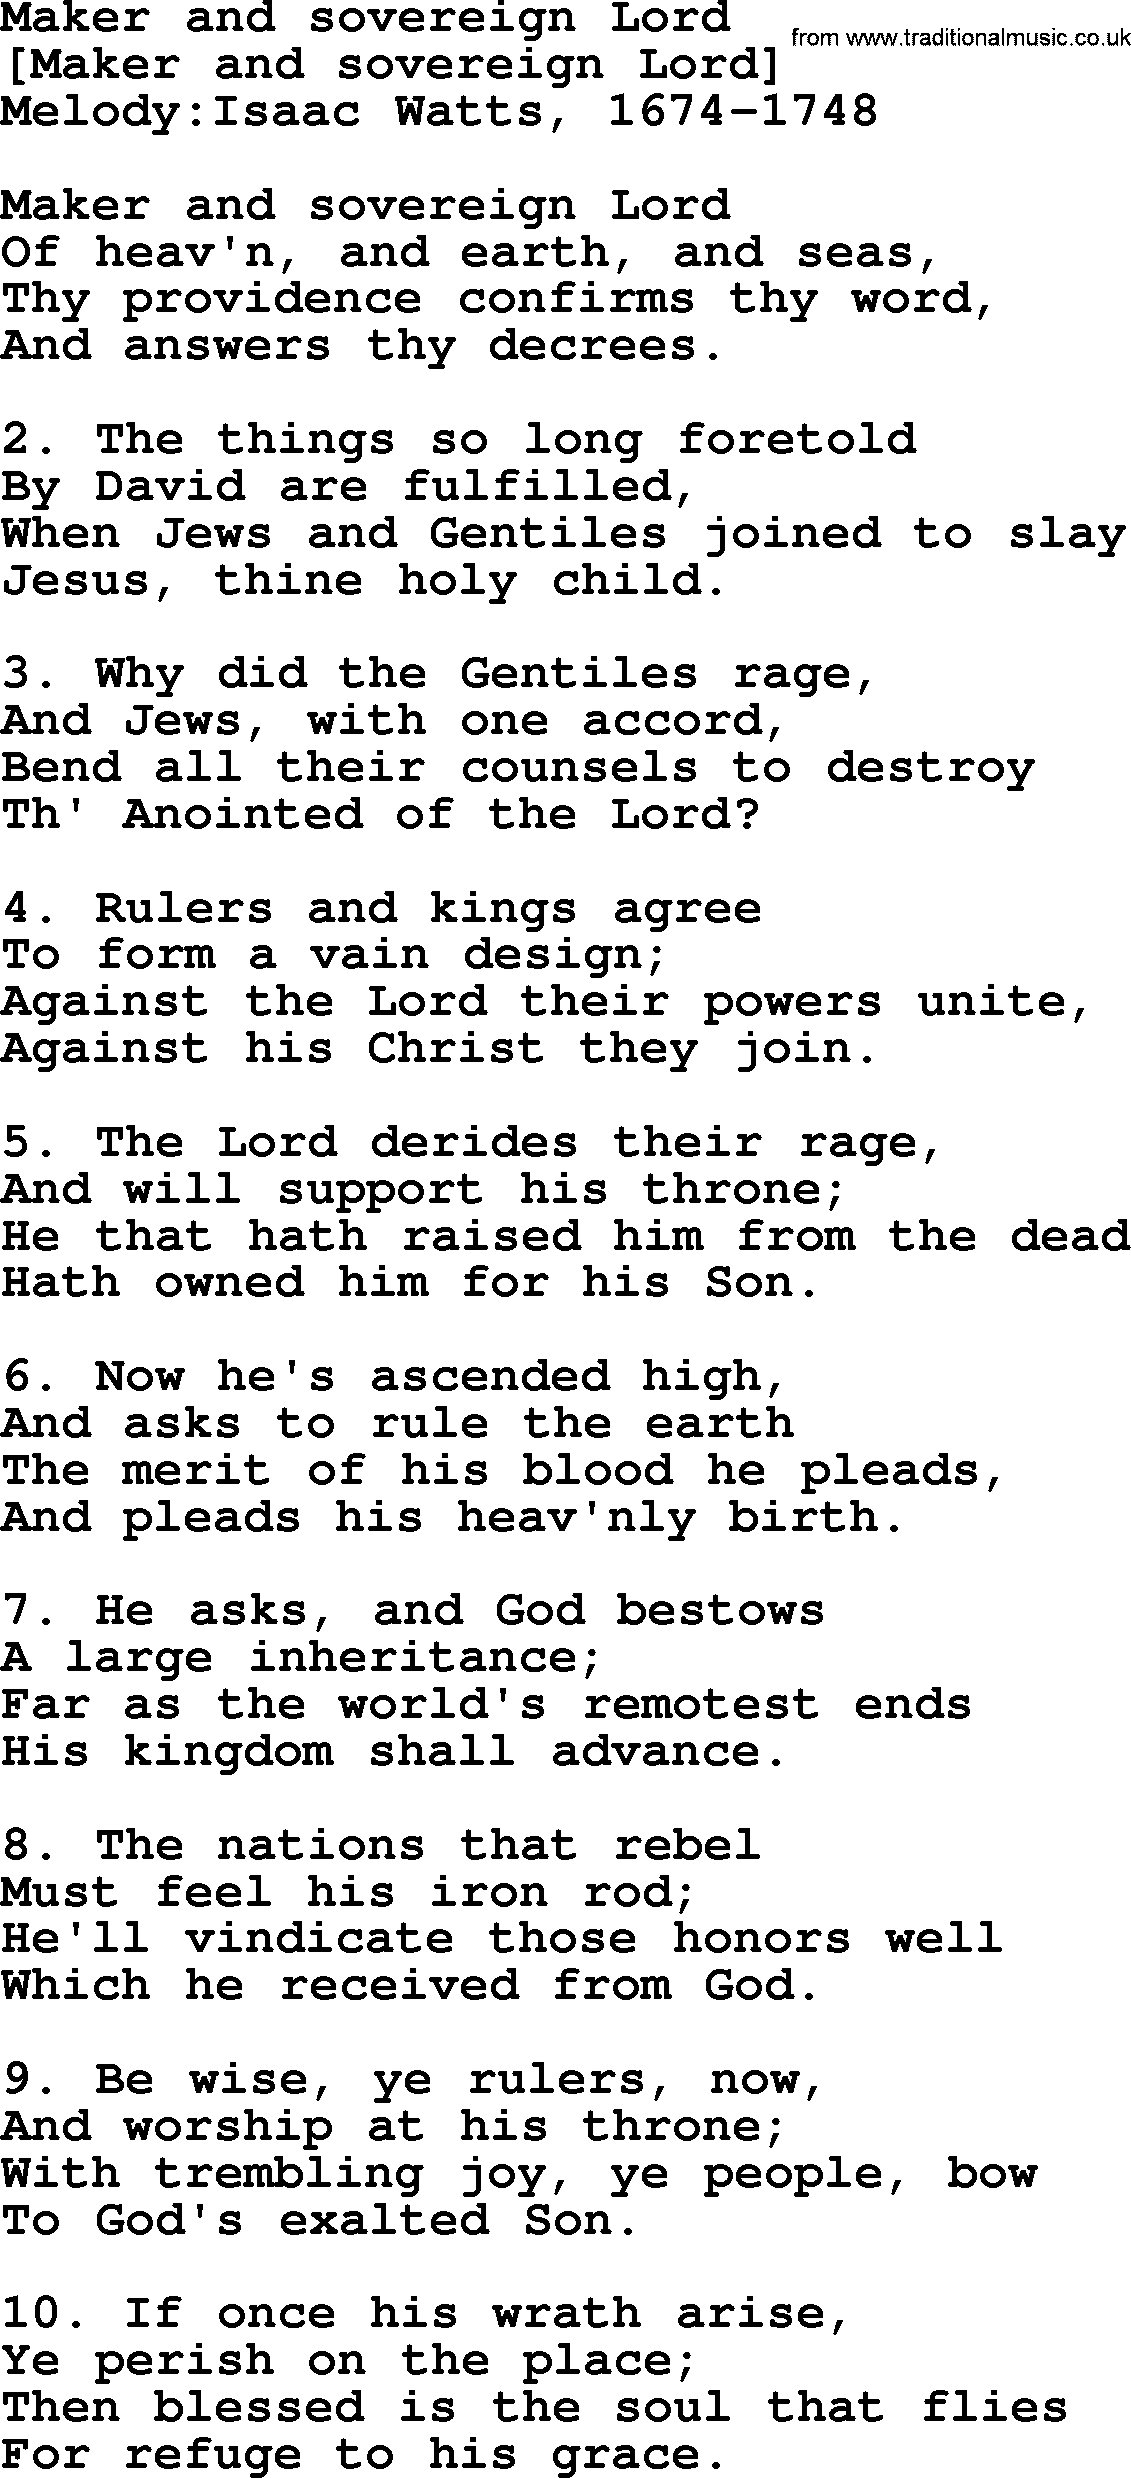 Old English Song: Maker And Sovereign Lord lyrics